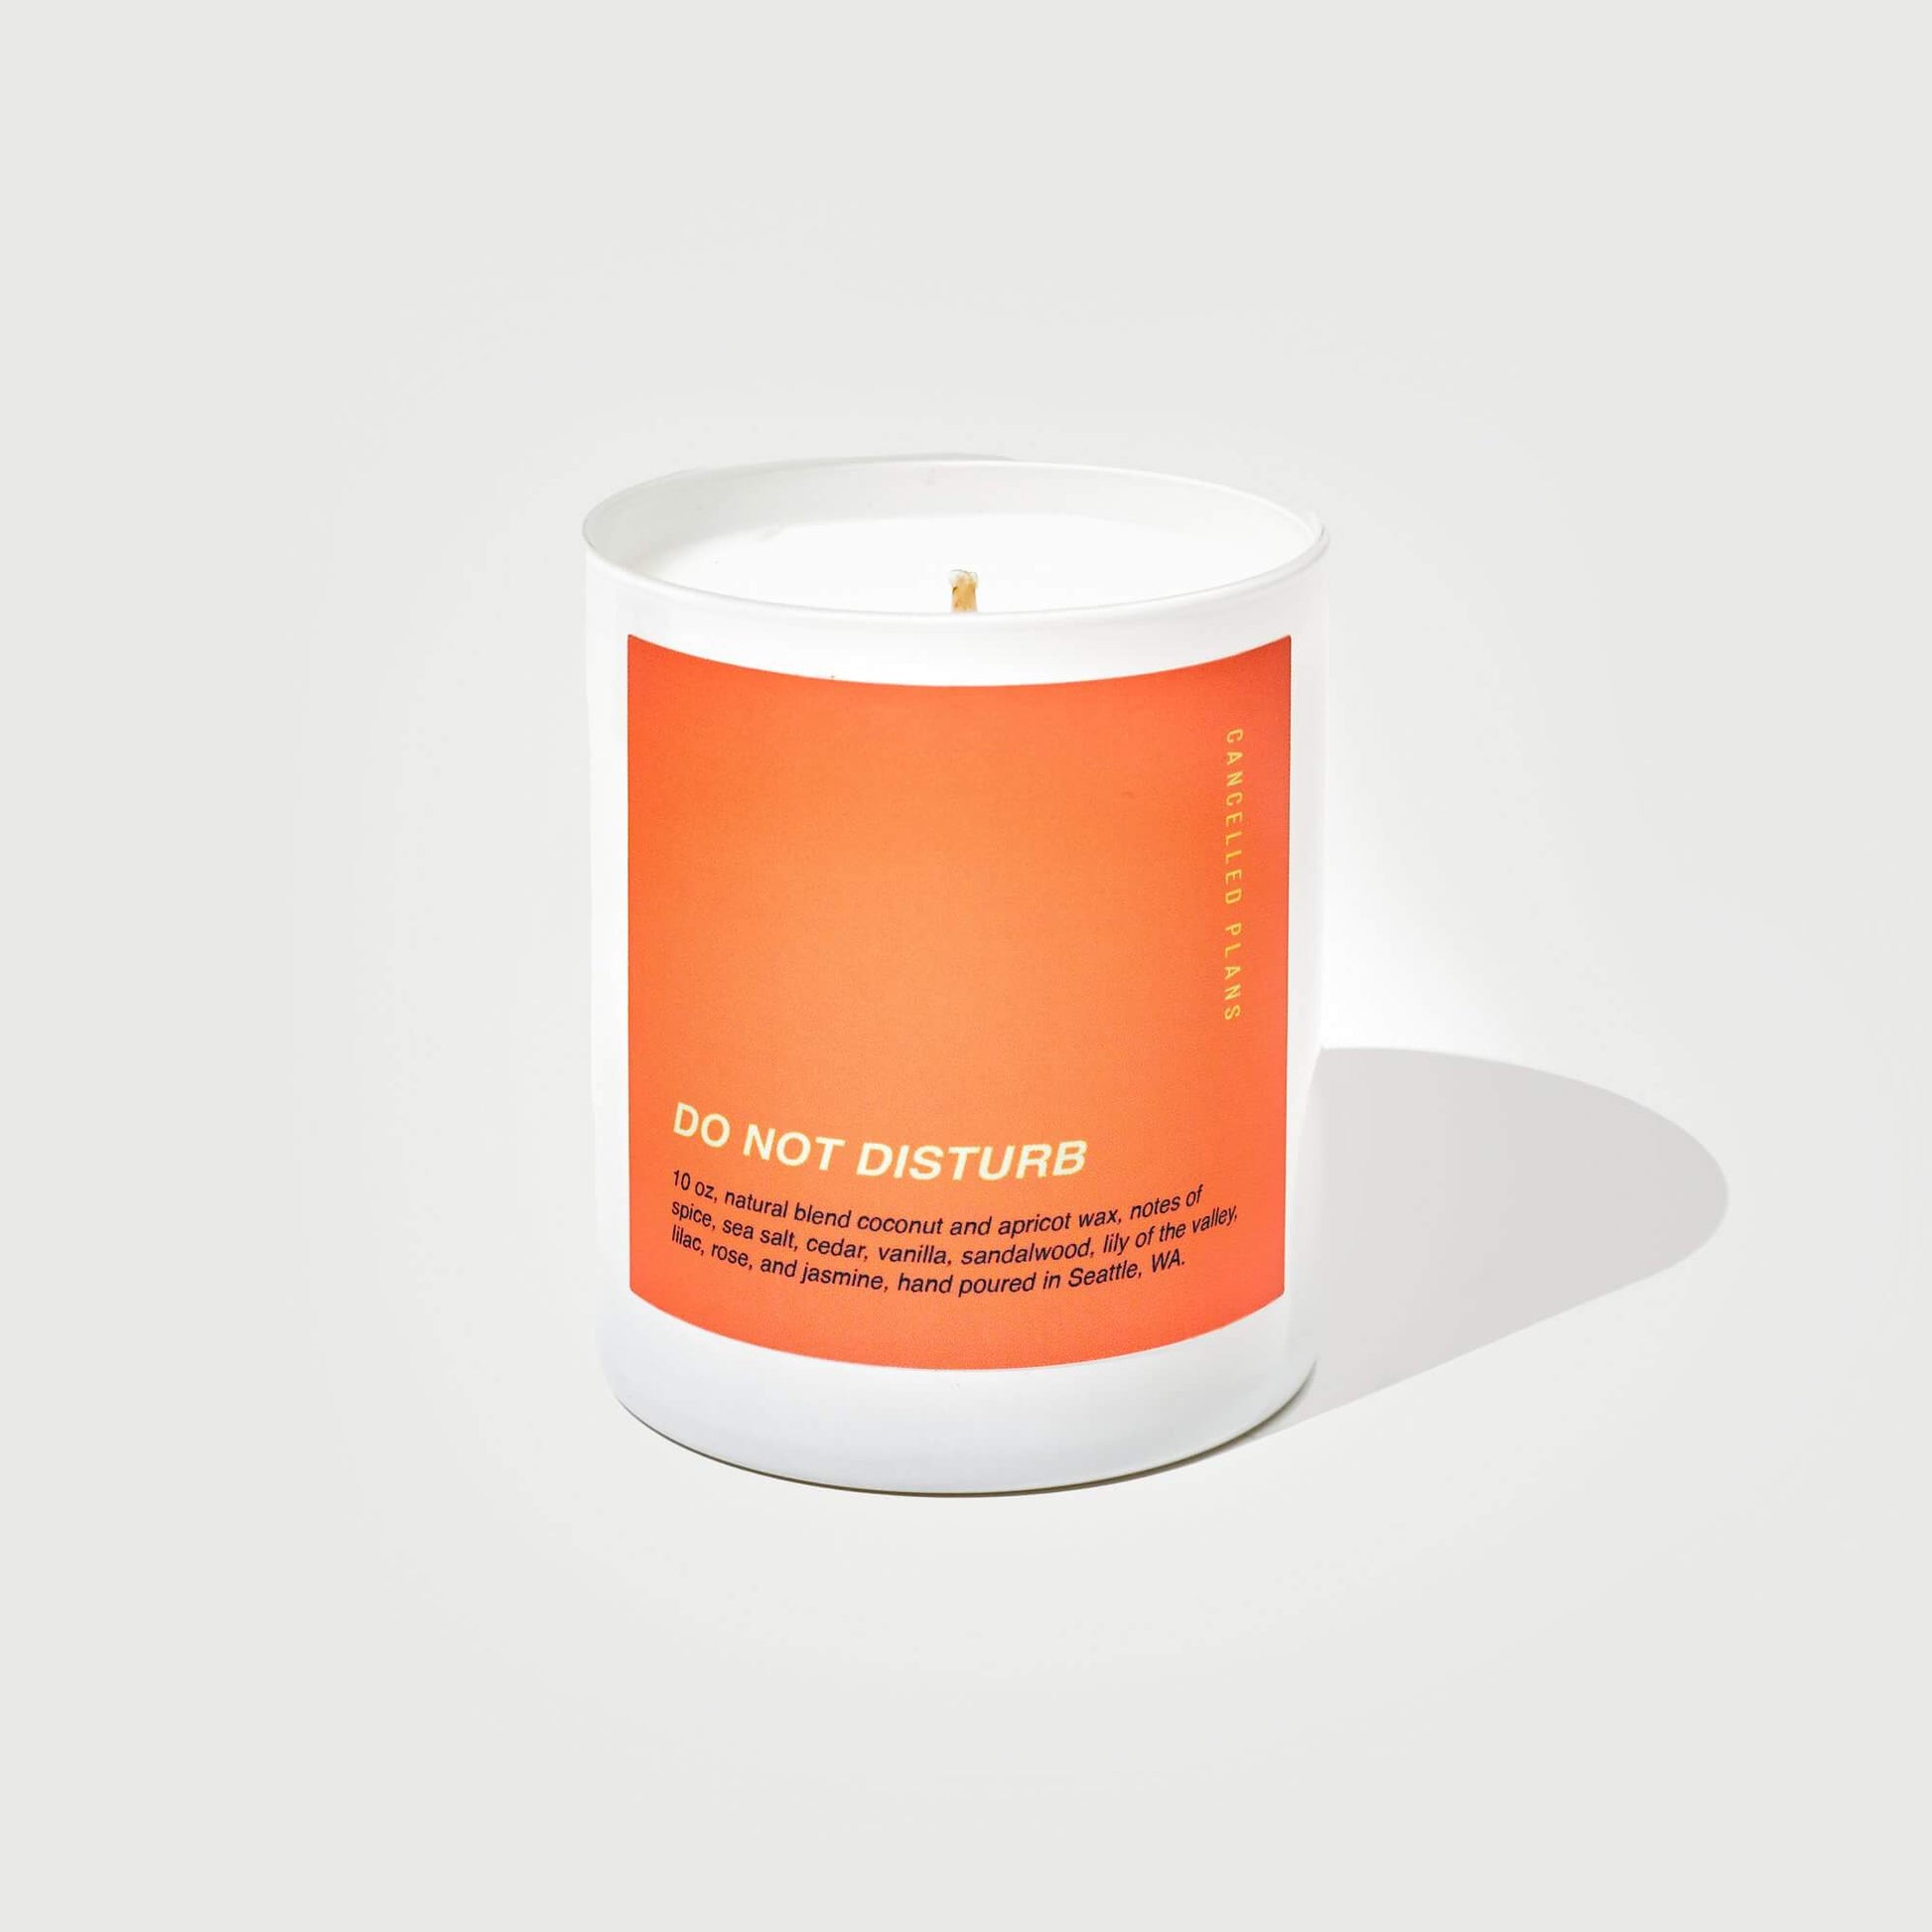 Cancelled Plans Do Not Disturb Scented Candle - Osmology Scented Candles & Home Fragrance